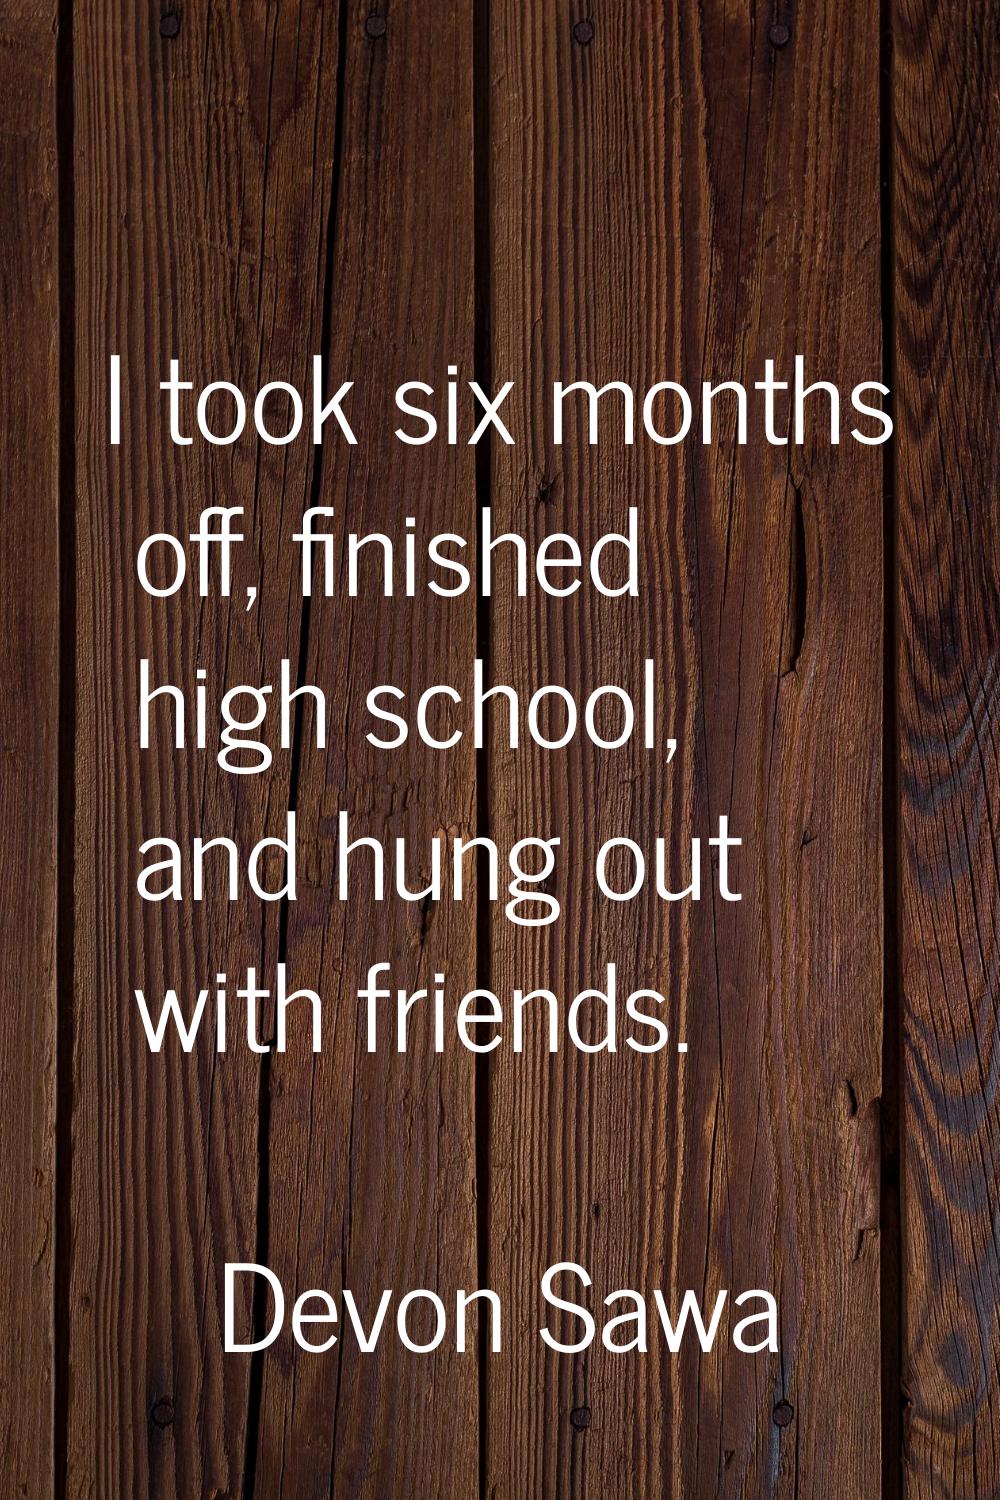 I took six months off, finished high school, and hung out with friends.